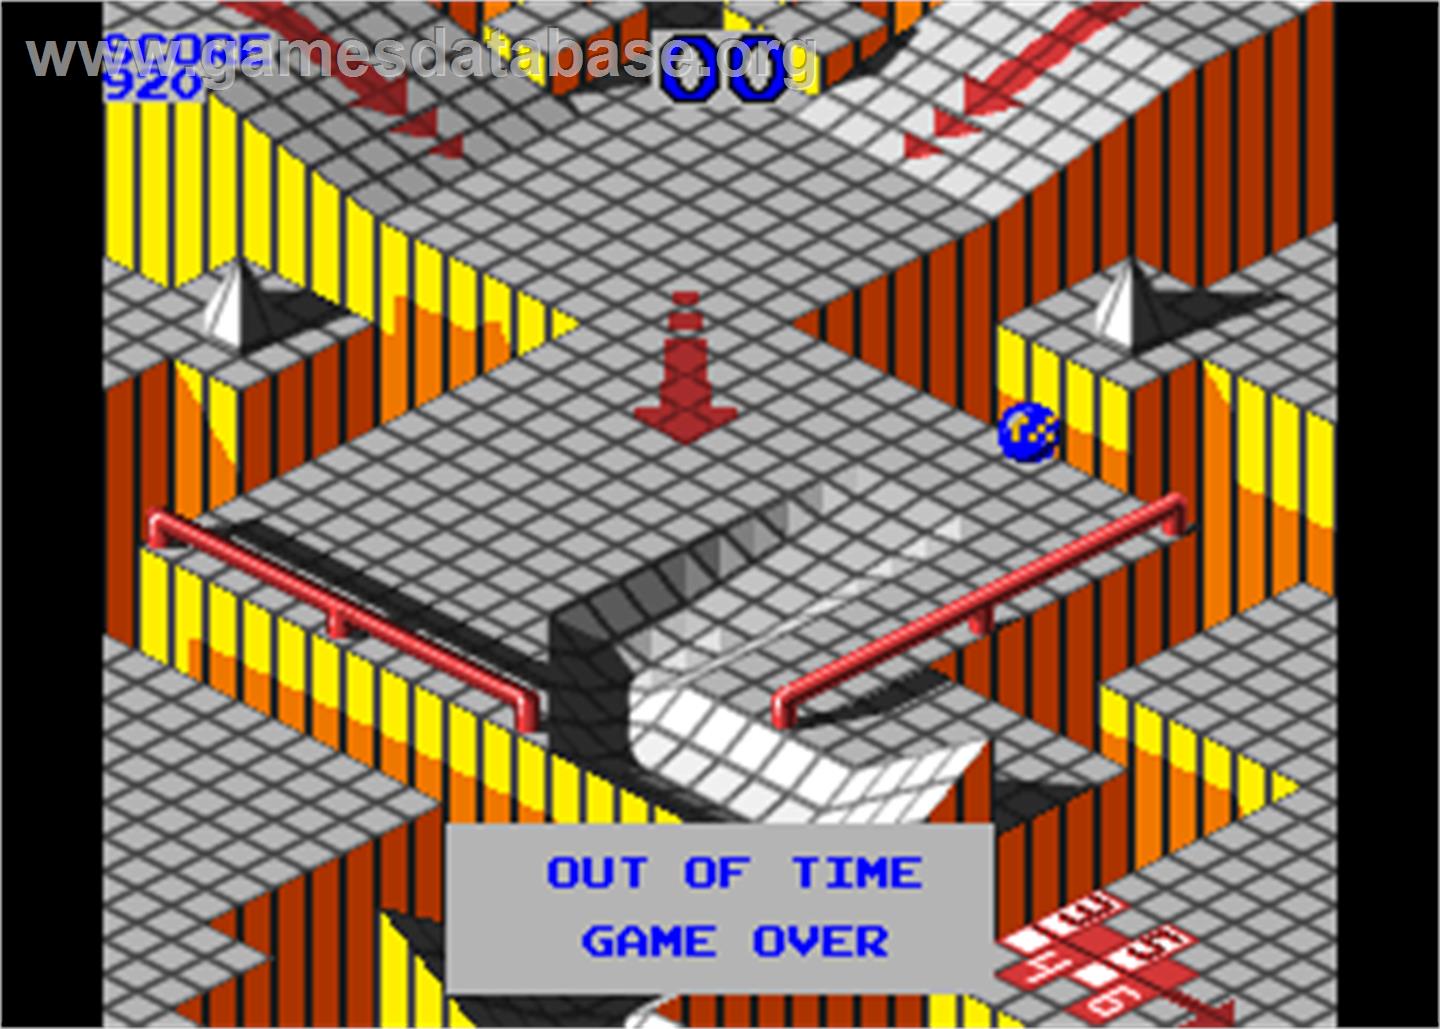 Marble Madness - Arcade - Artwork - Game Over Screen